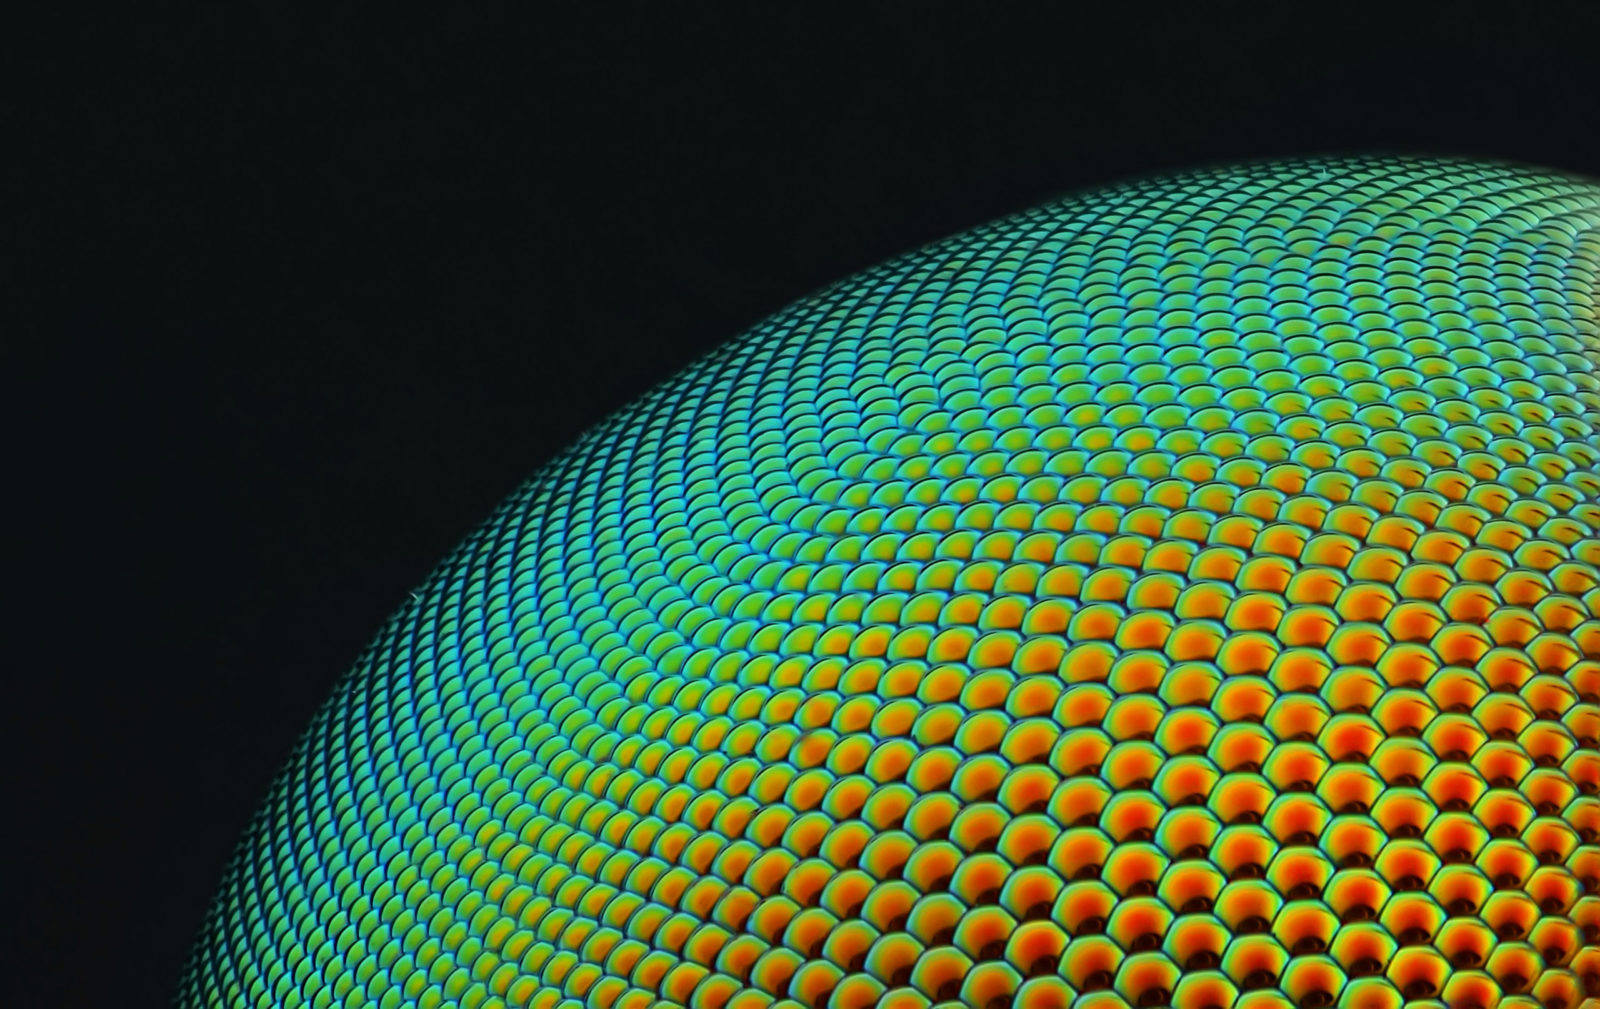 Housefly compound eye pattern  2019 Photomicrography Competition